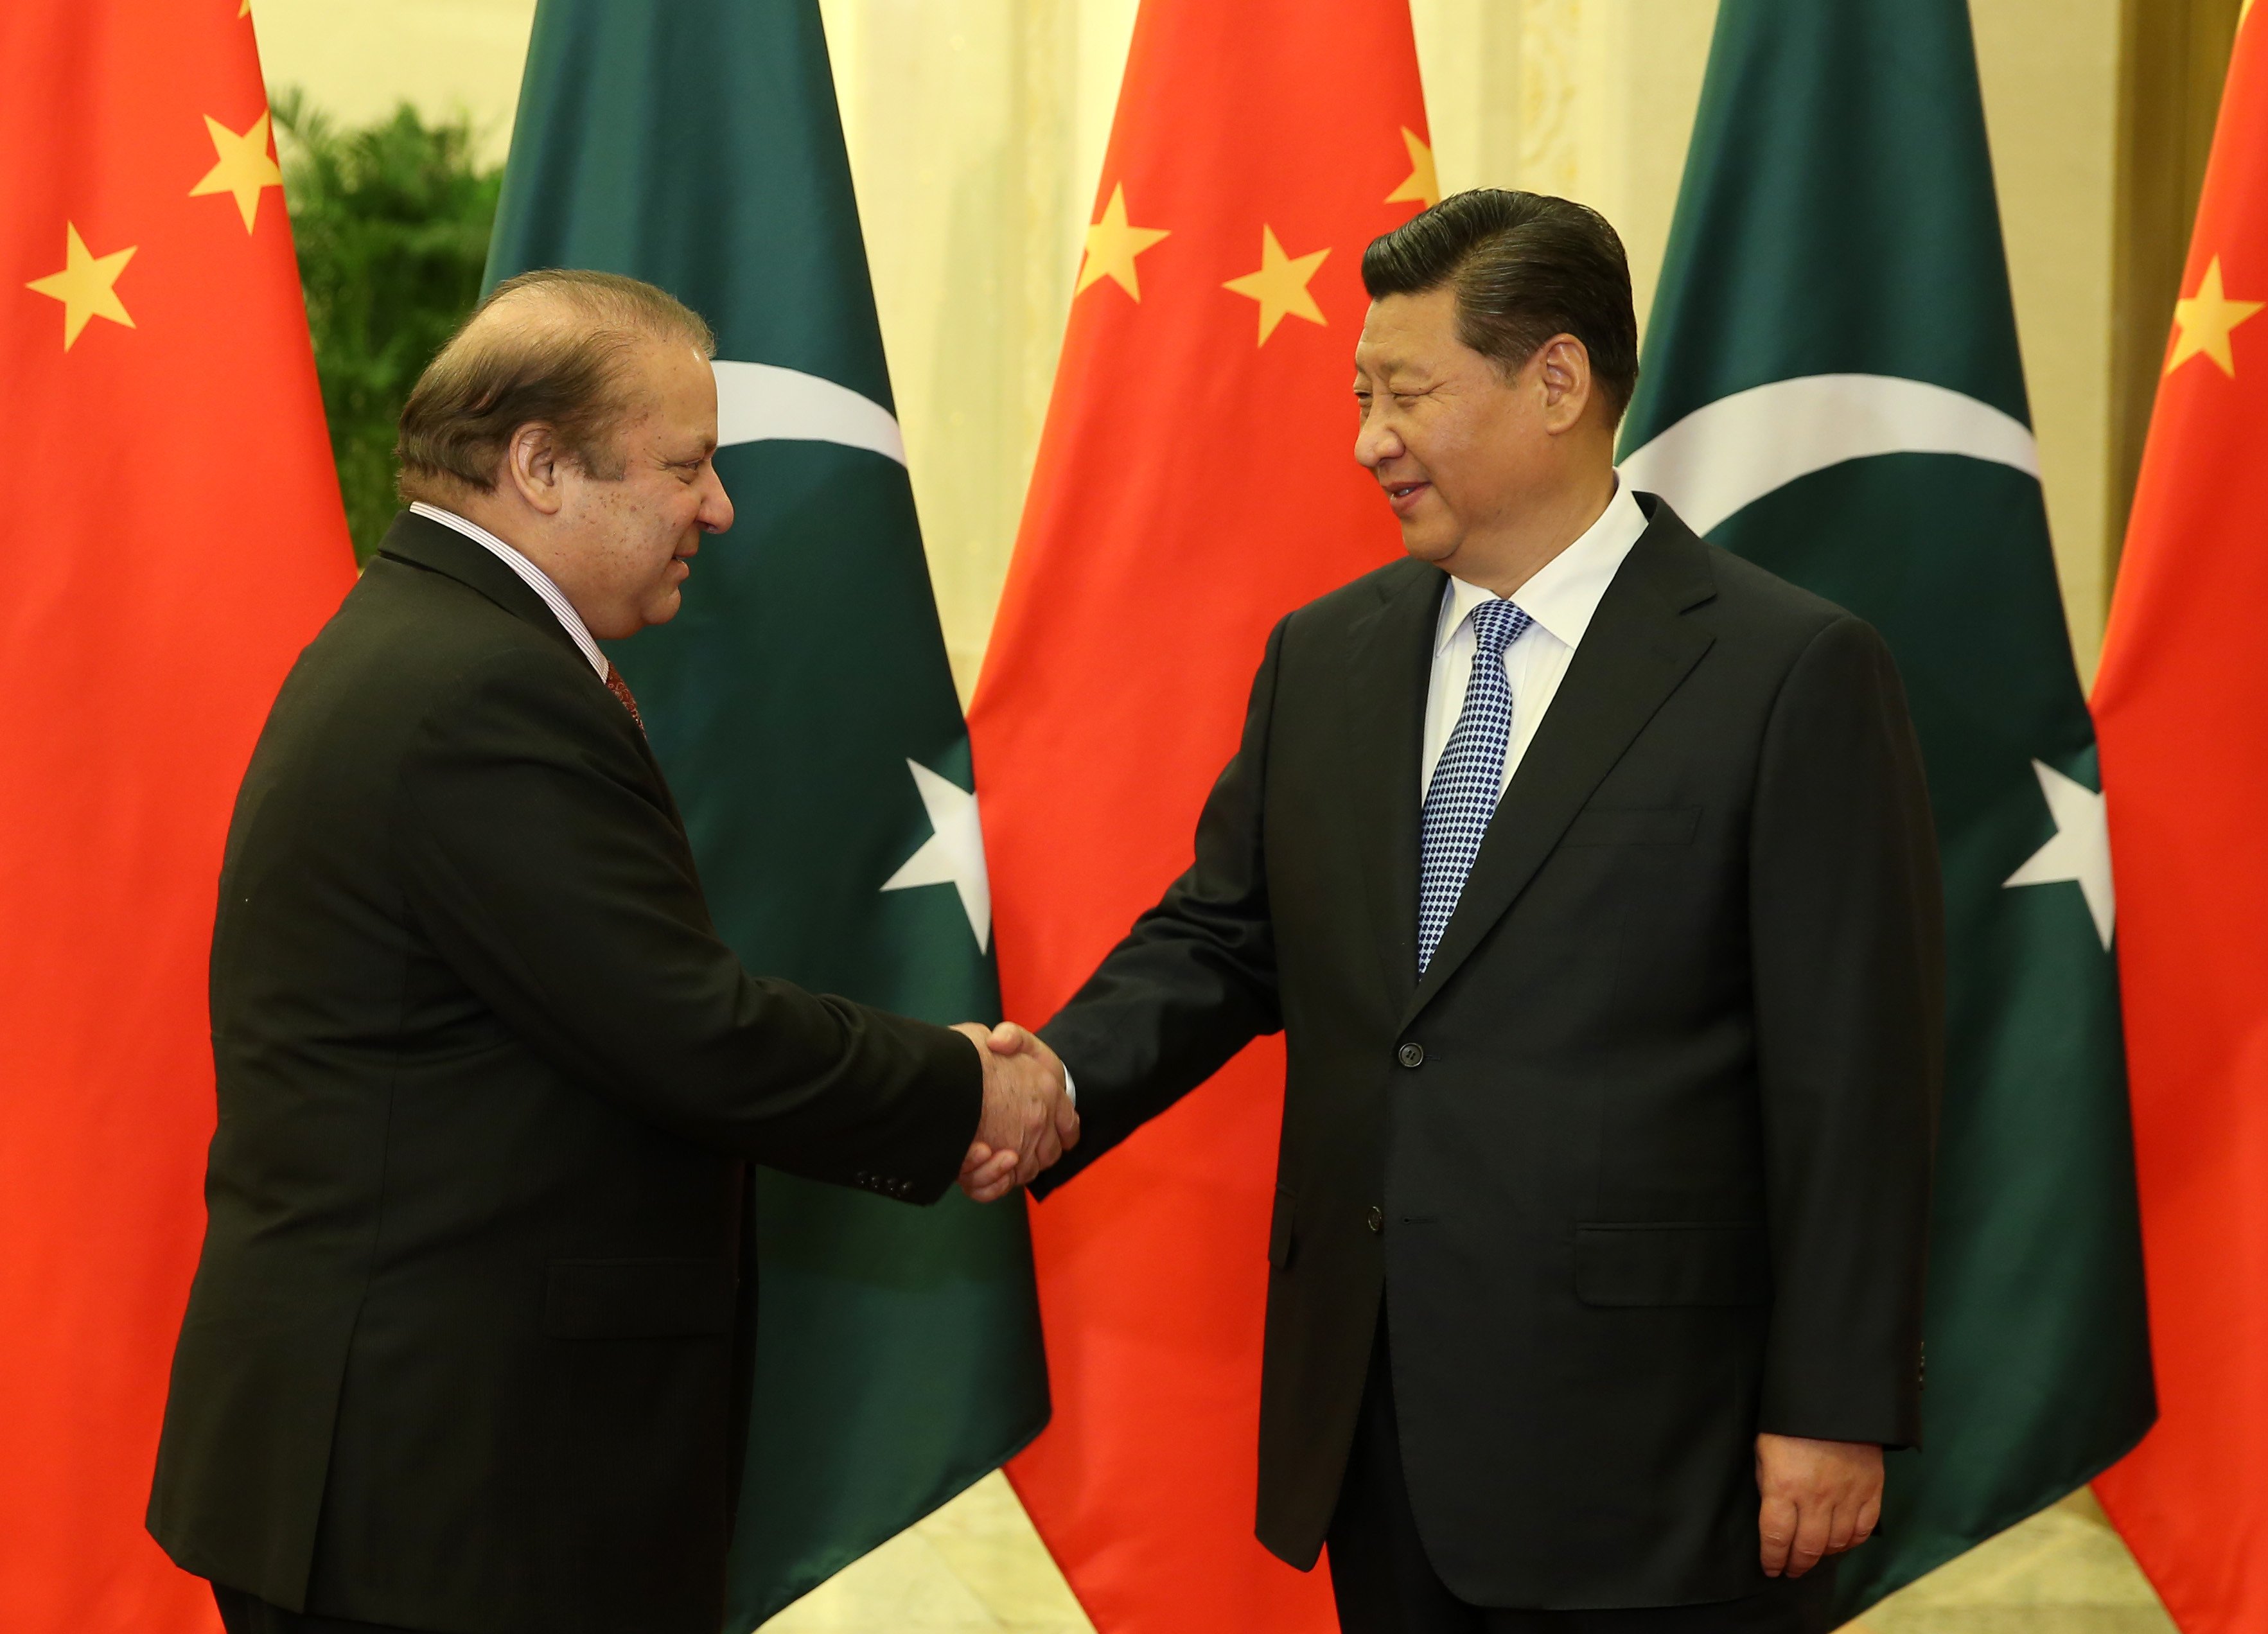 pm nawaz sharif shakes hands with chinese president xi jinping photo pid